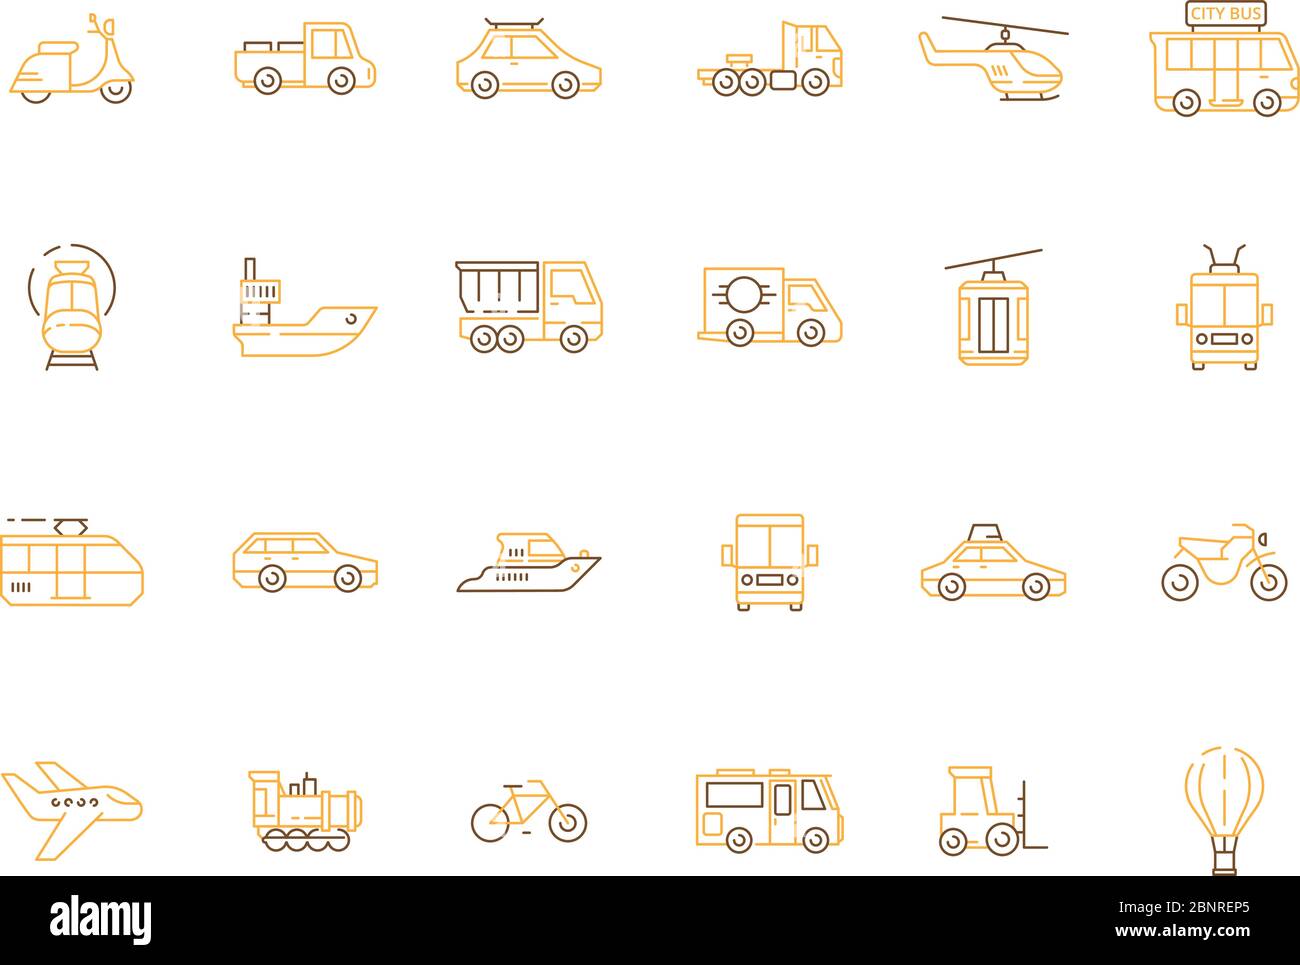 Urban transport icon. Public vehicles taxi motorcycle planes boats helicopter car train vector outline pictures Stock Vector